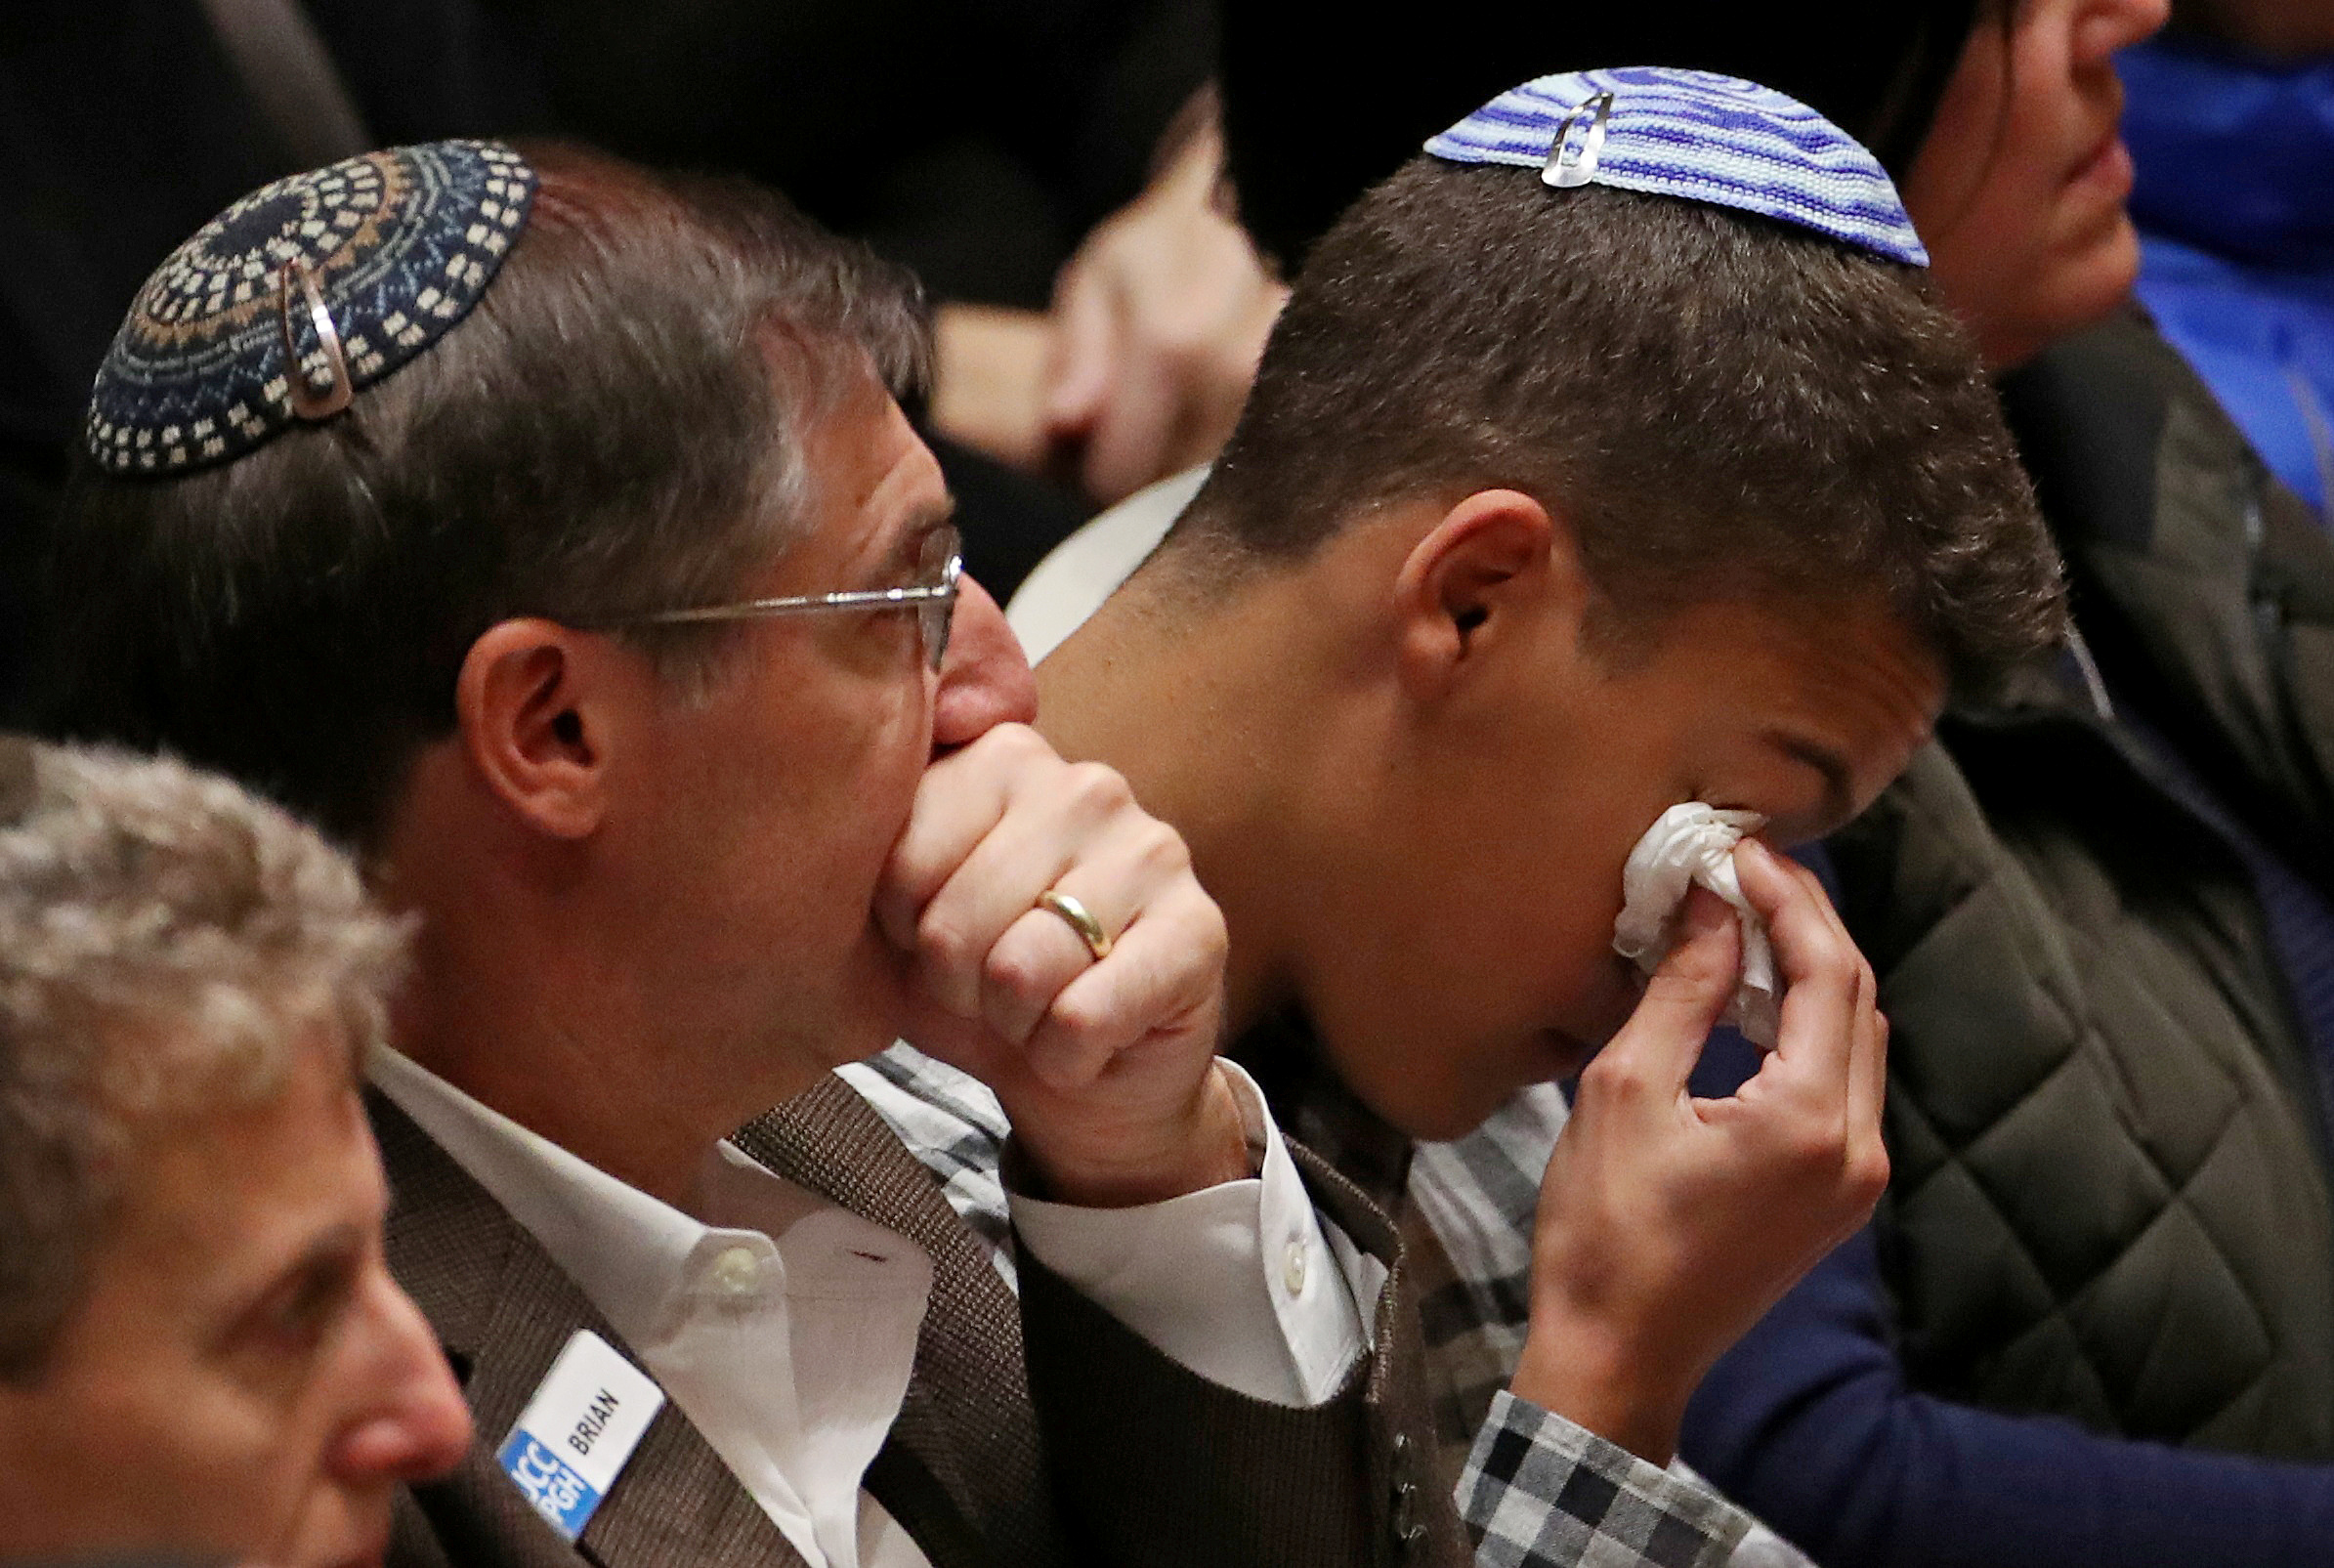 Mourners react during a memorial service at the Sailors and Soldiers Memorial Hall of the University of Pittsburgh, a day after 11 worshippers were shot dead at a Jewish synagogue in Pittsburgh, Pennsylvania, U.S., October 28, 2018. REUTERS/Cathal McNaughton